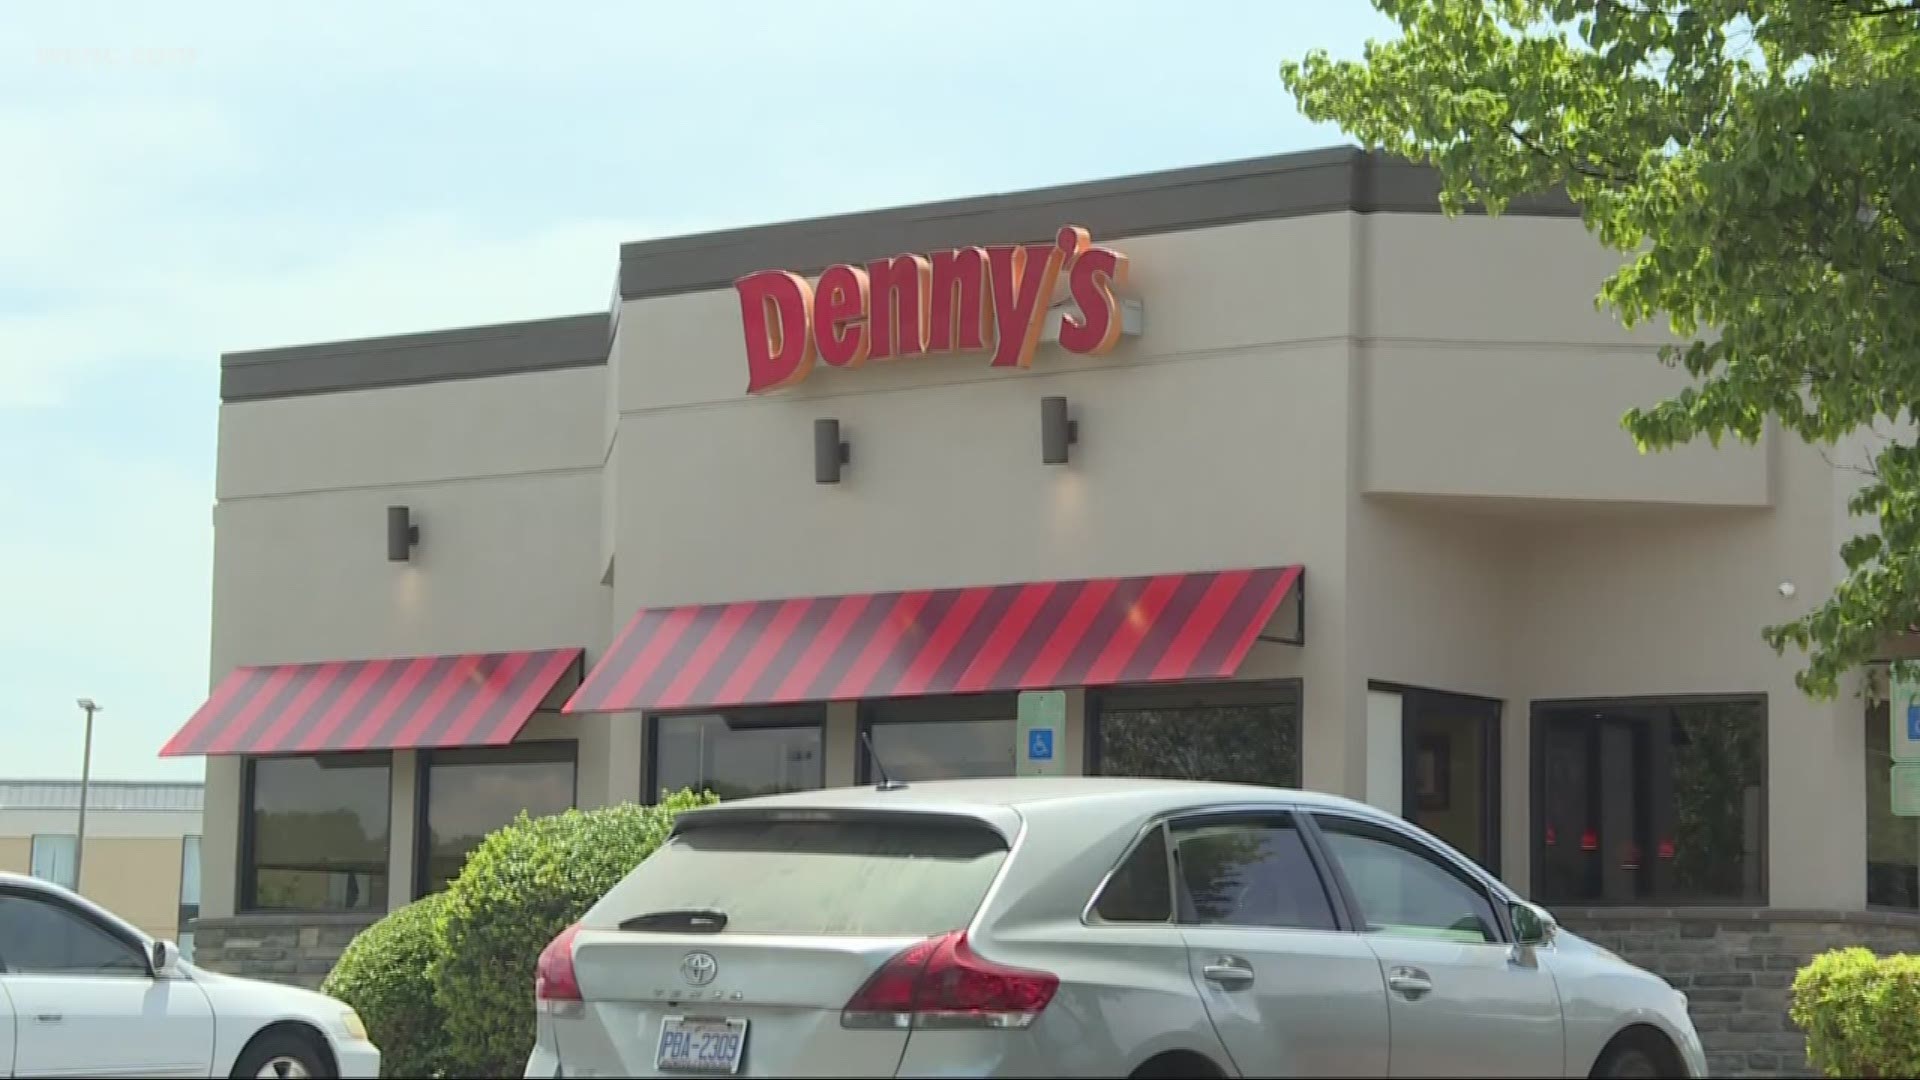 It all happened inside Denny's in Shelby after a transgender woman used the women's bathroom.